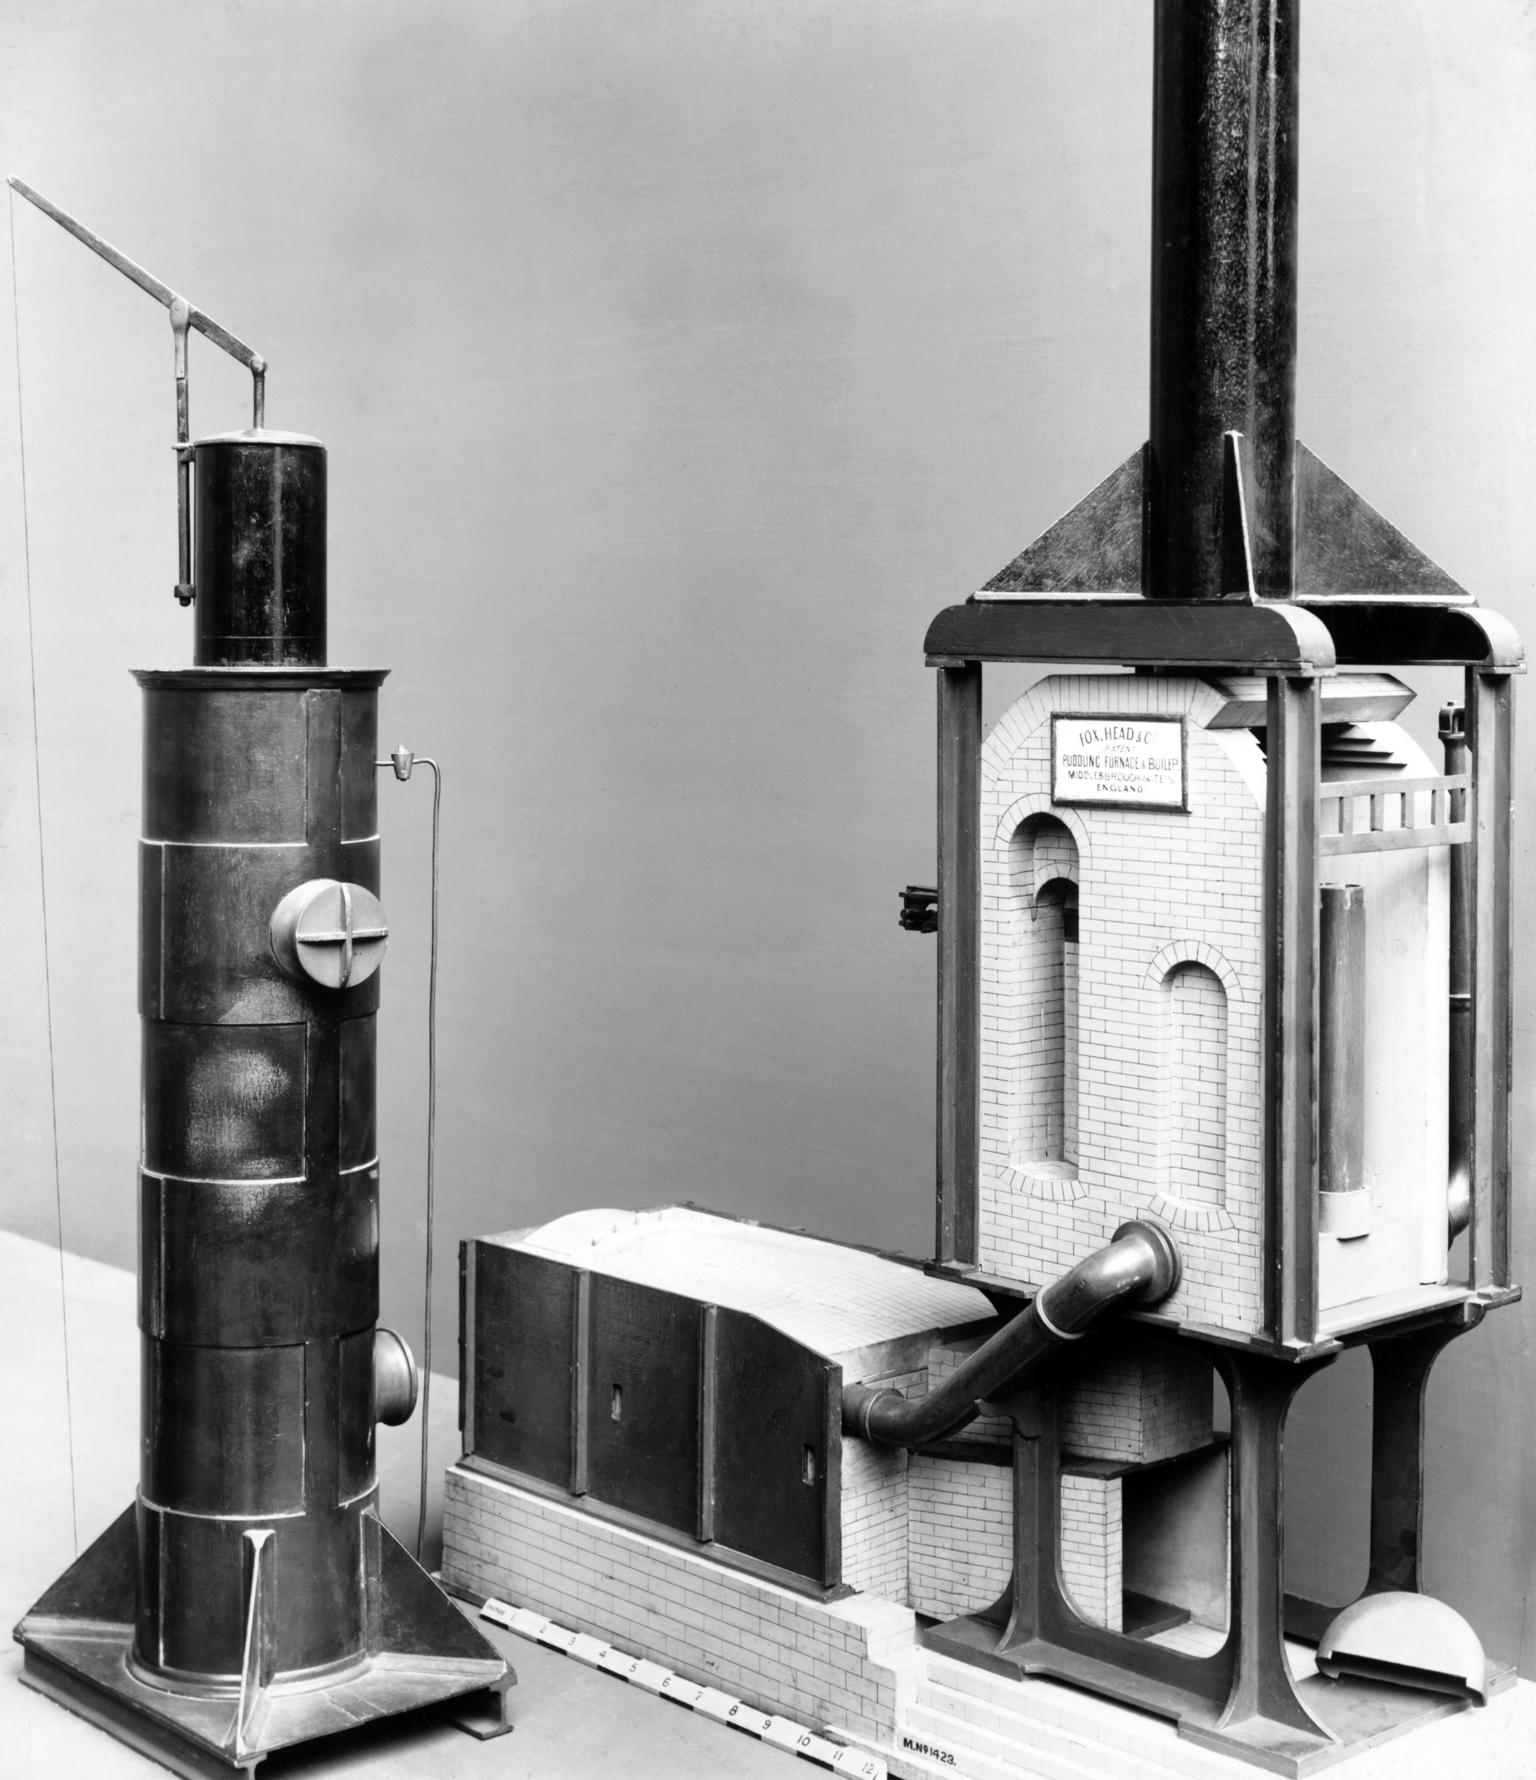 Sectional model of a puddling furnace